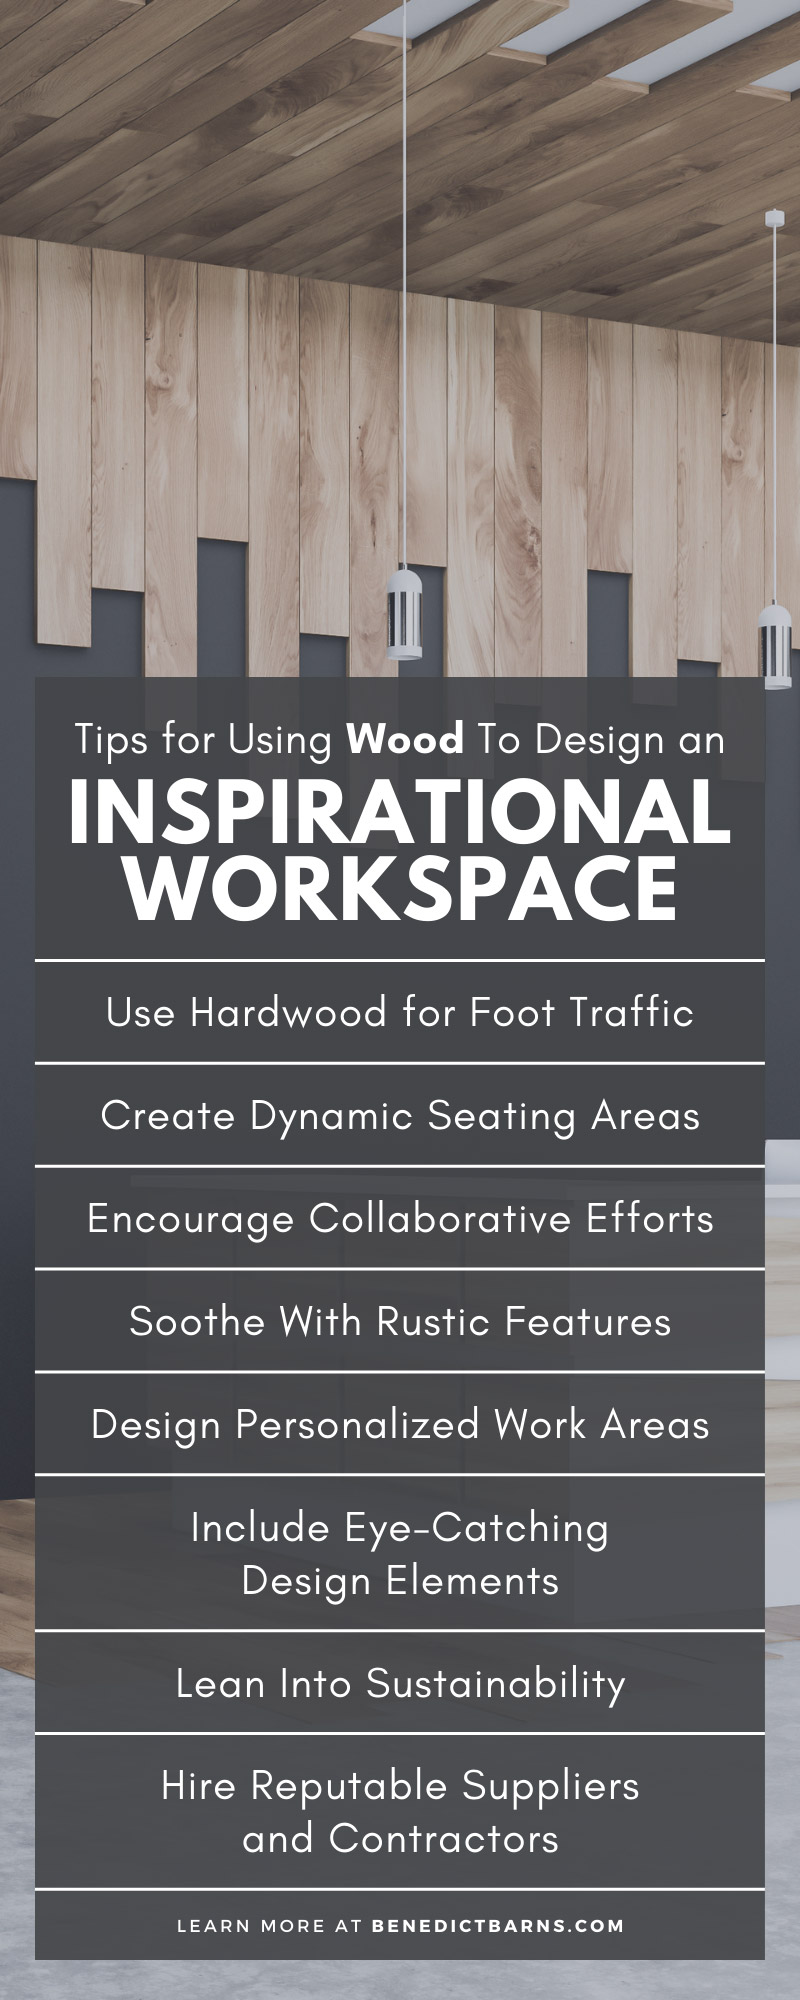 Tips for Using Wood To Design an Inspirational Workspace